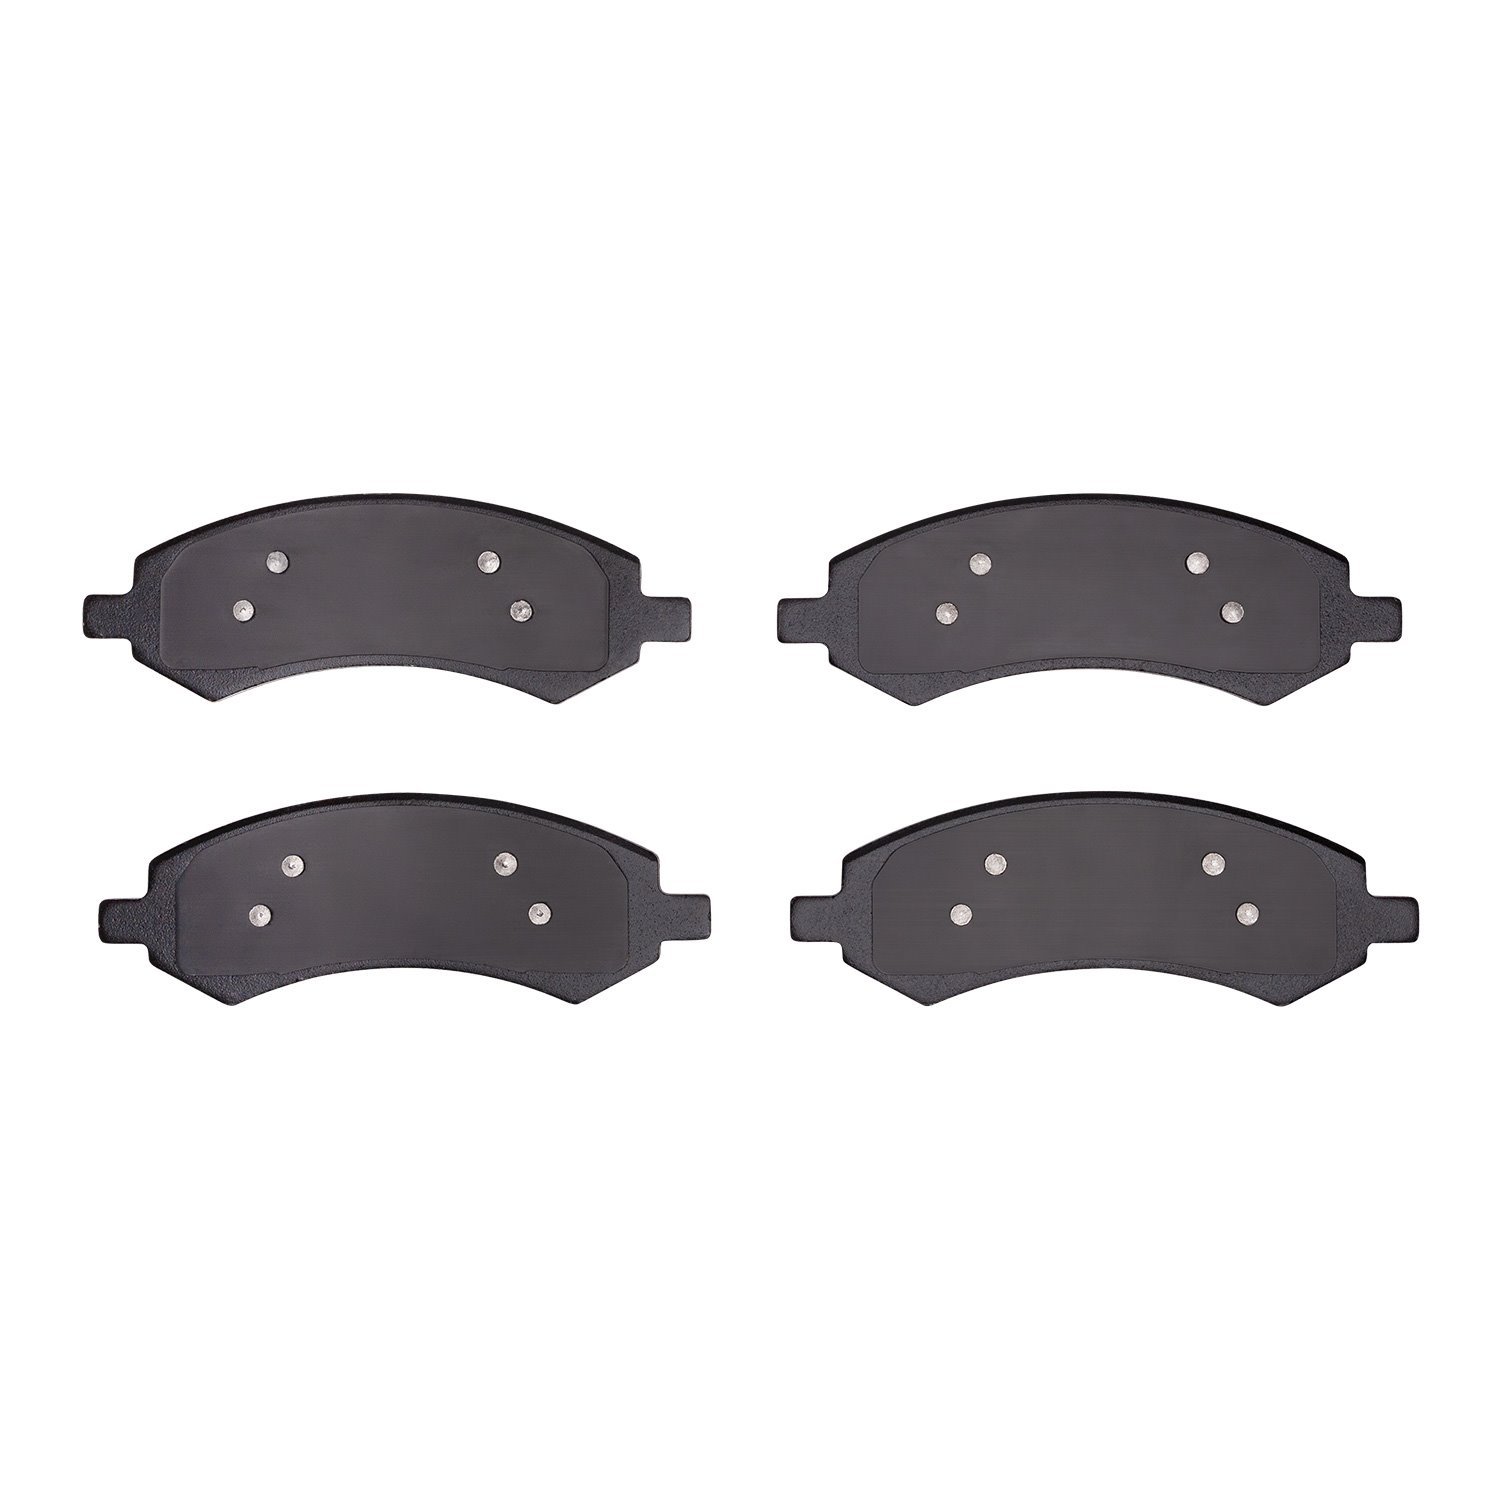 1214-1084-00 Heavy-Duty Semi-Metallic Brake Pads, Fits Select Multiple Makes/Models, Position: Front